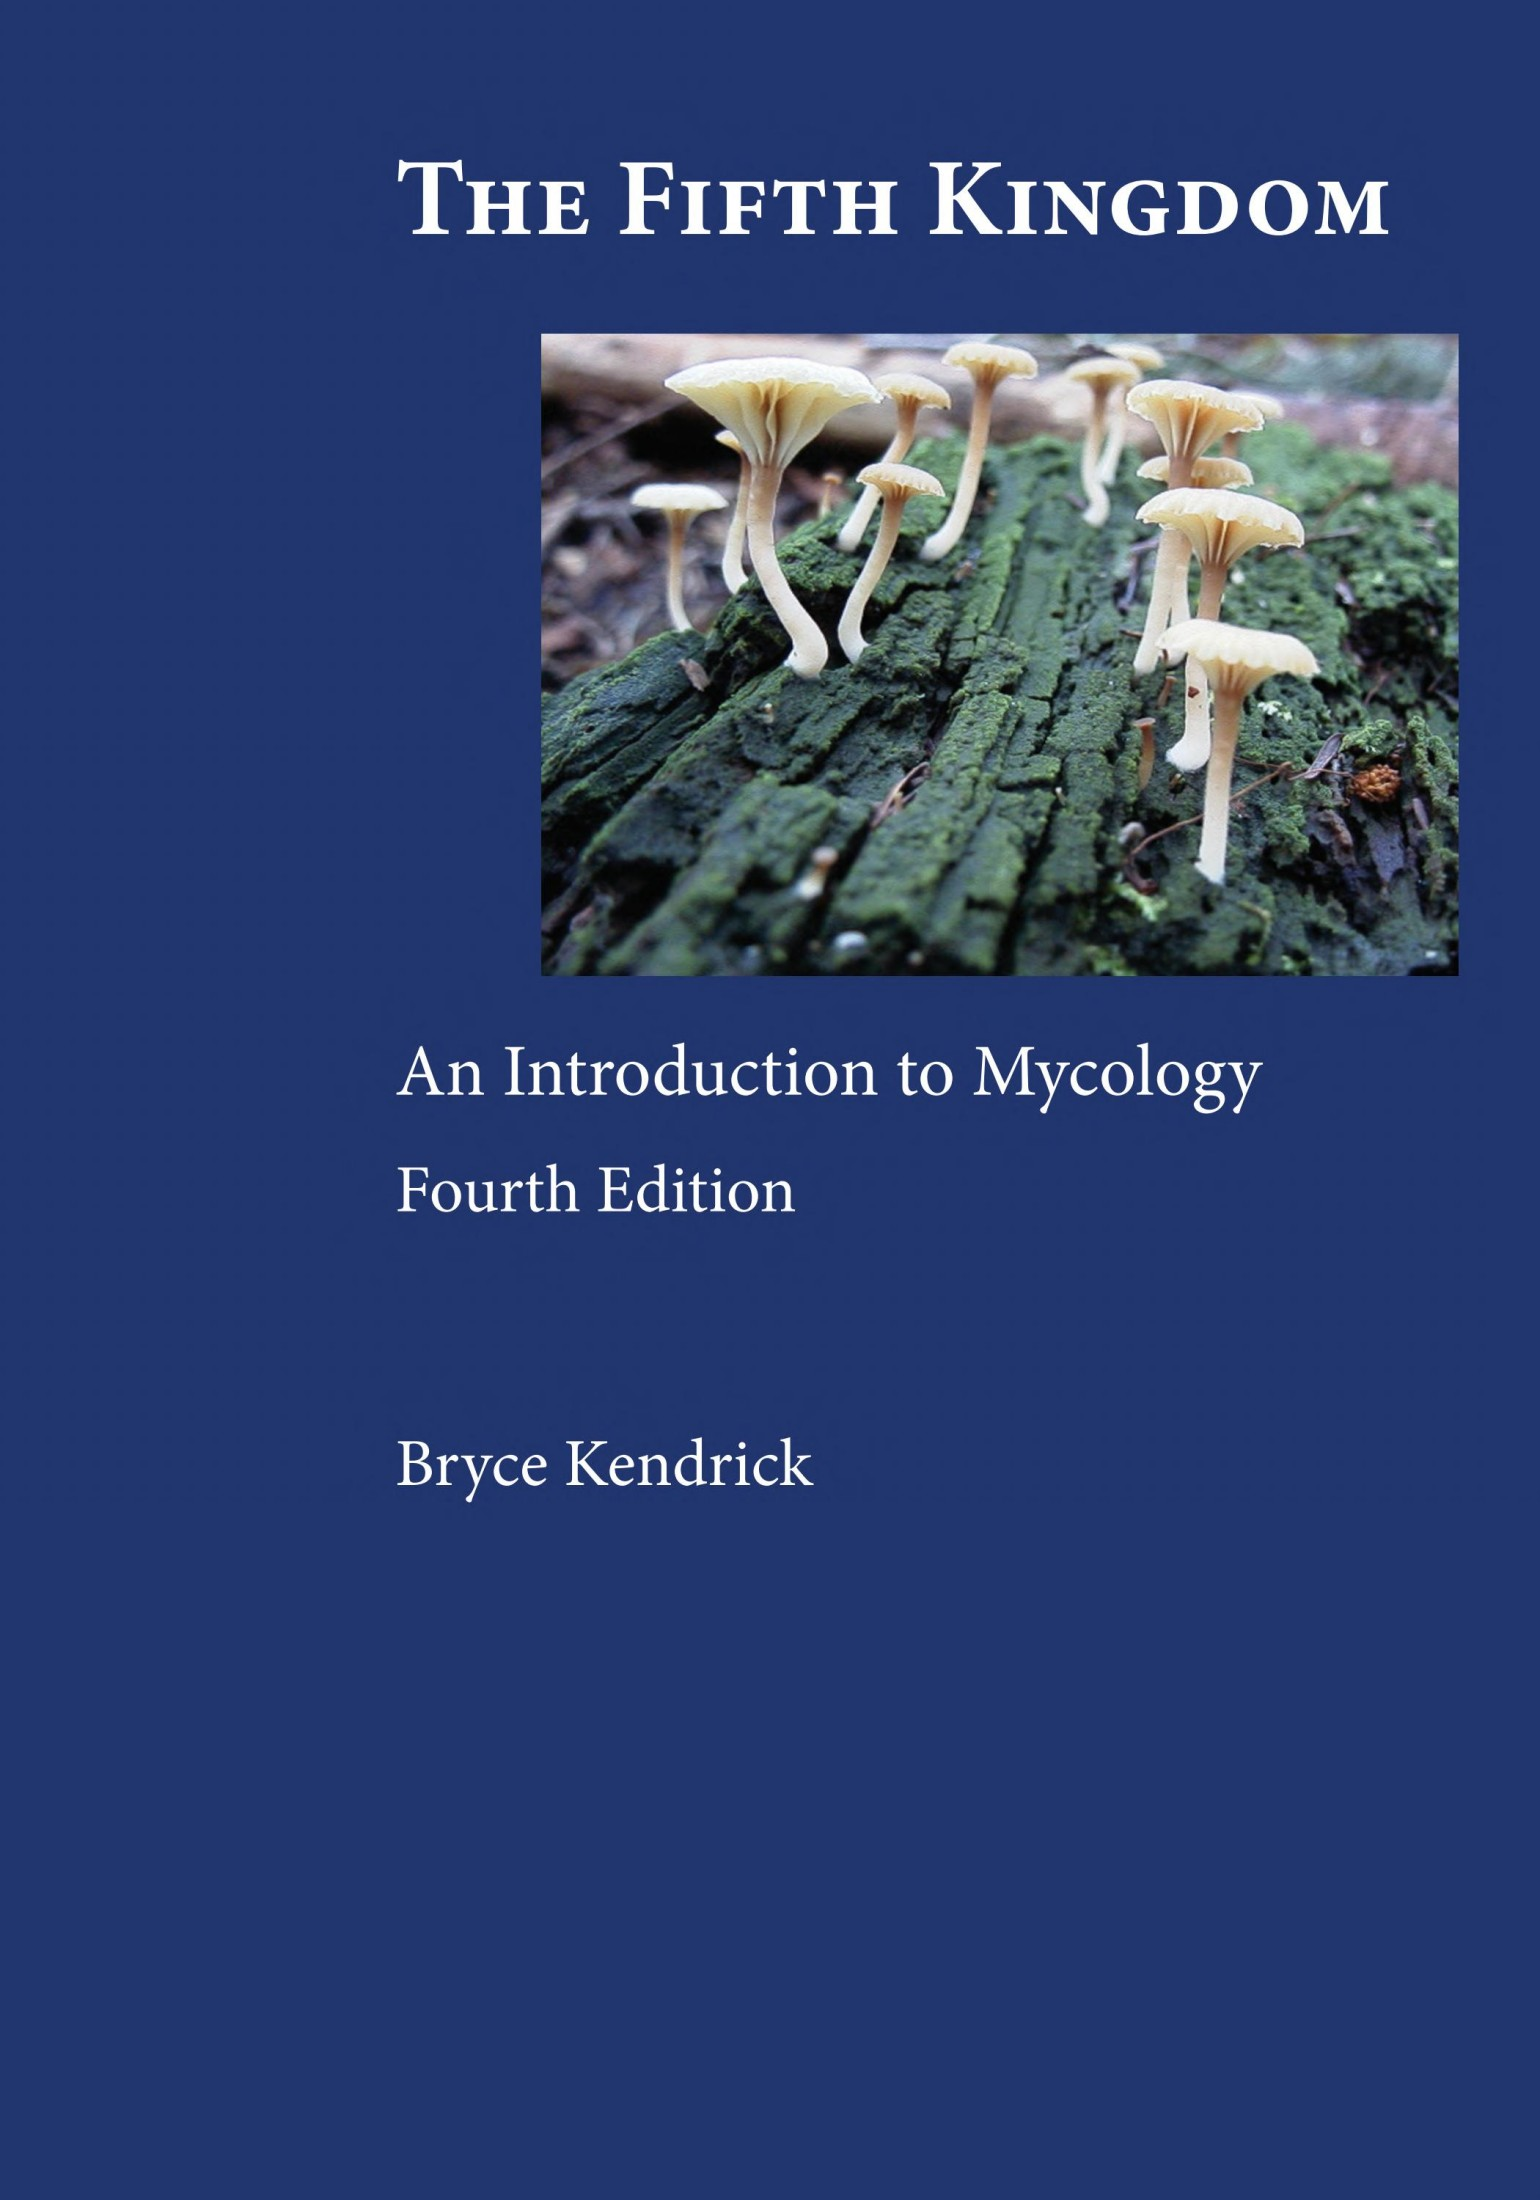 The fifth kingdom : an introduction to mycology